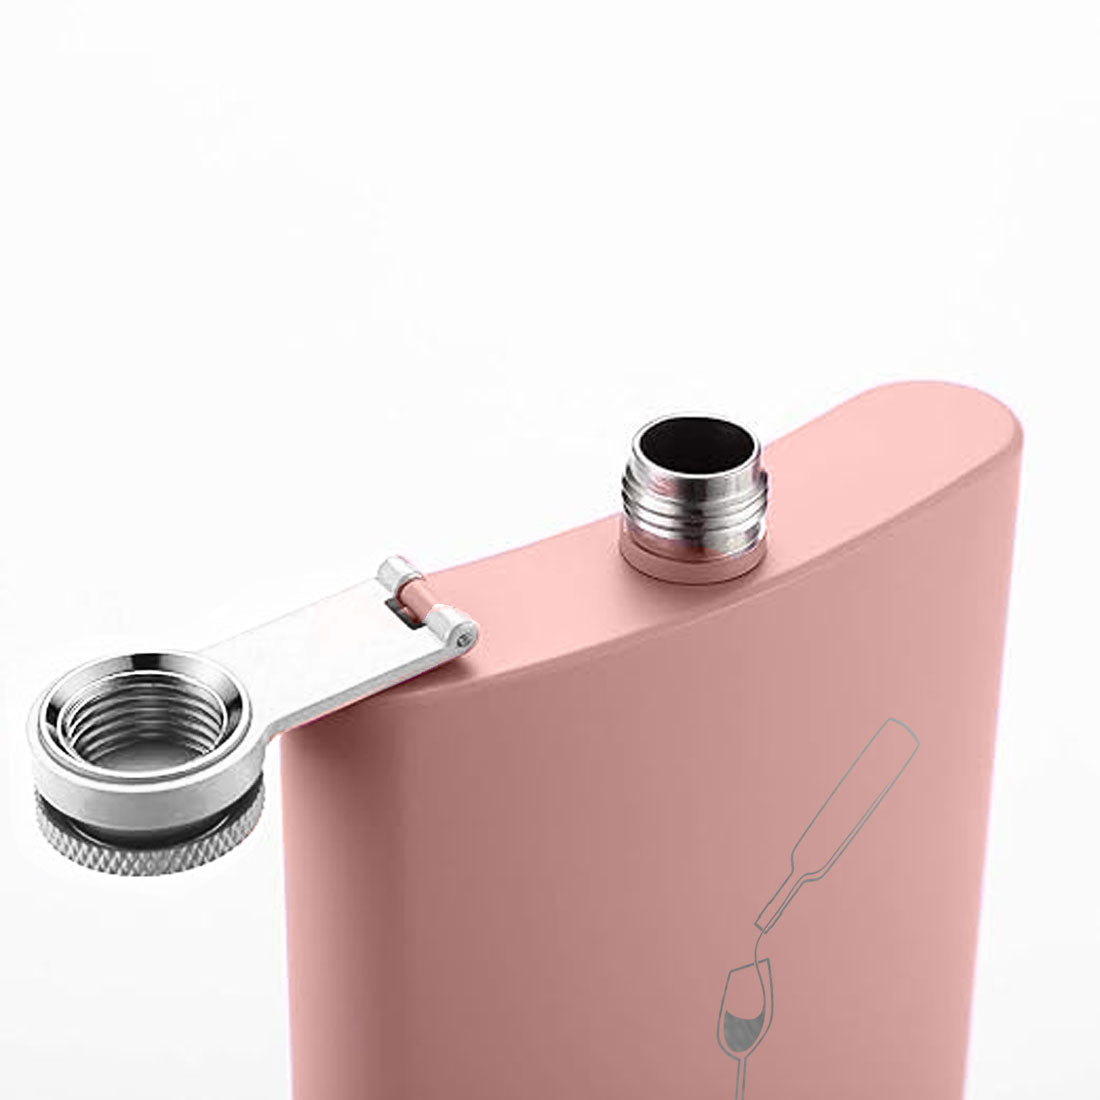 Customized Womens Hip Flask Stainless Steel 8oz Pink Whiskey Flask with Funnel